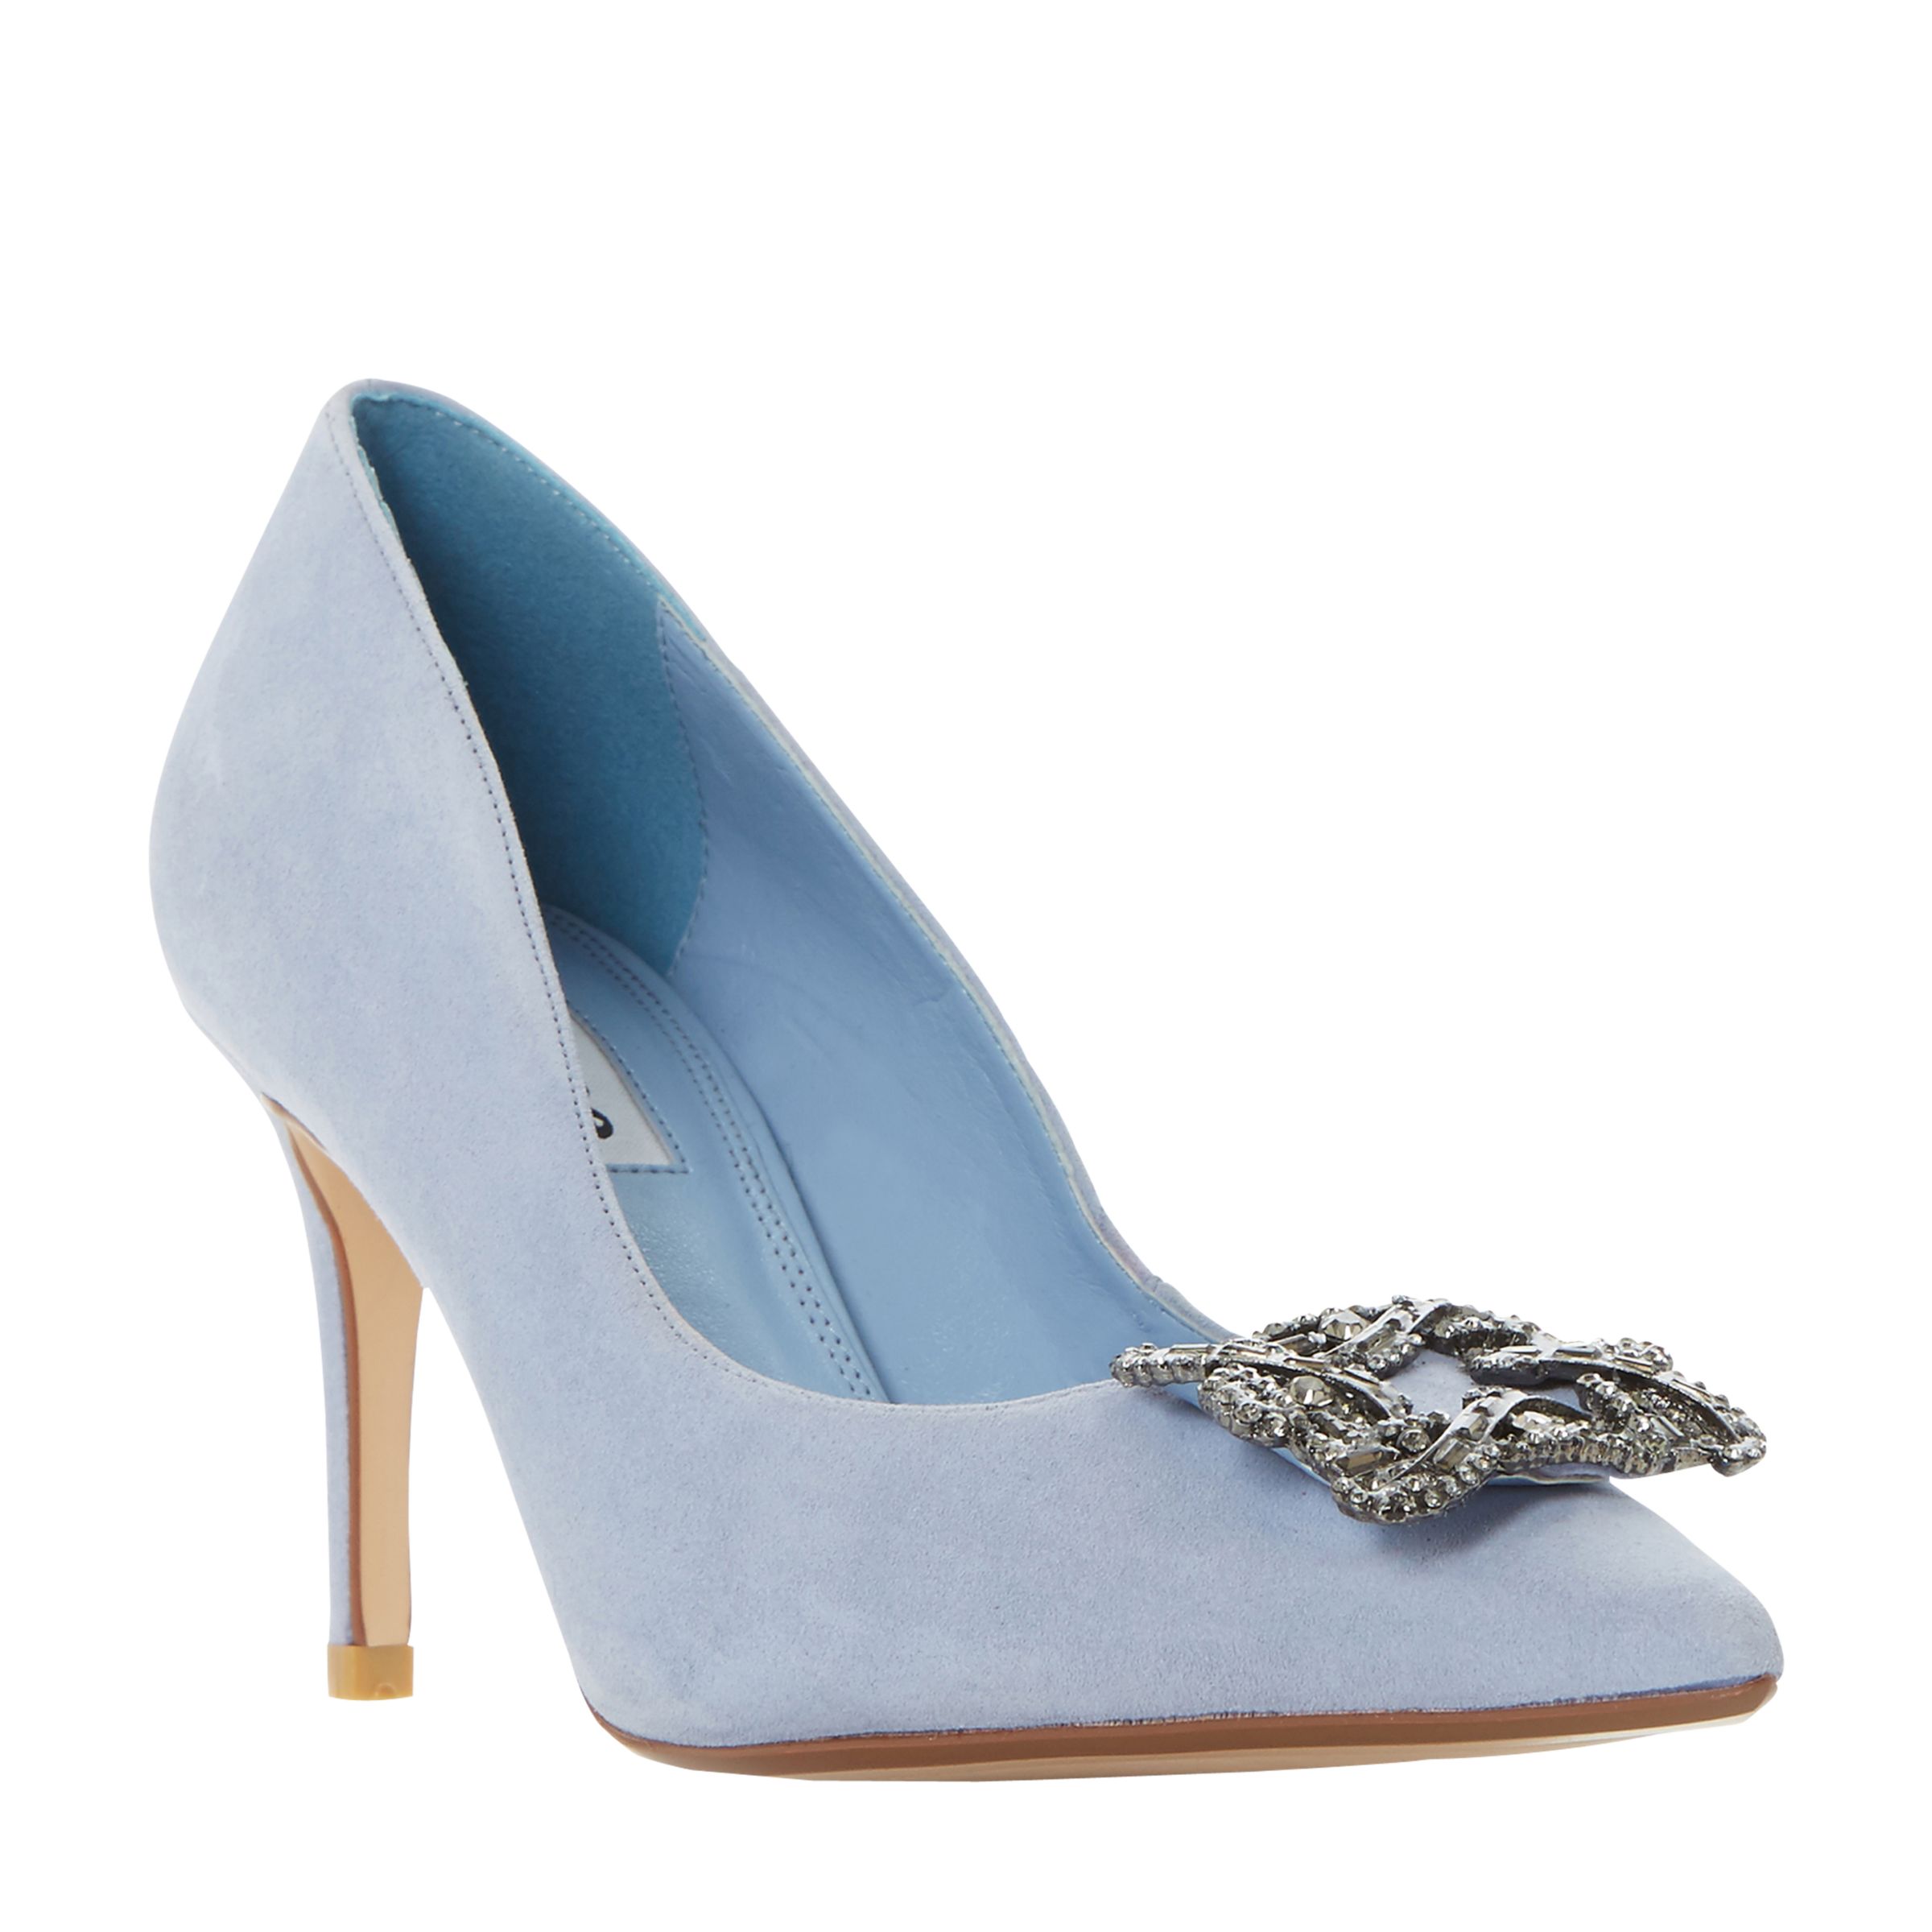 Dune Betti Embellished Stiletto Heeled Court Shoes, Blue Suede, 5